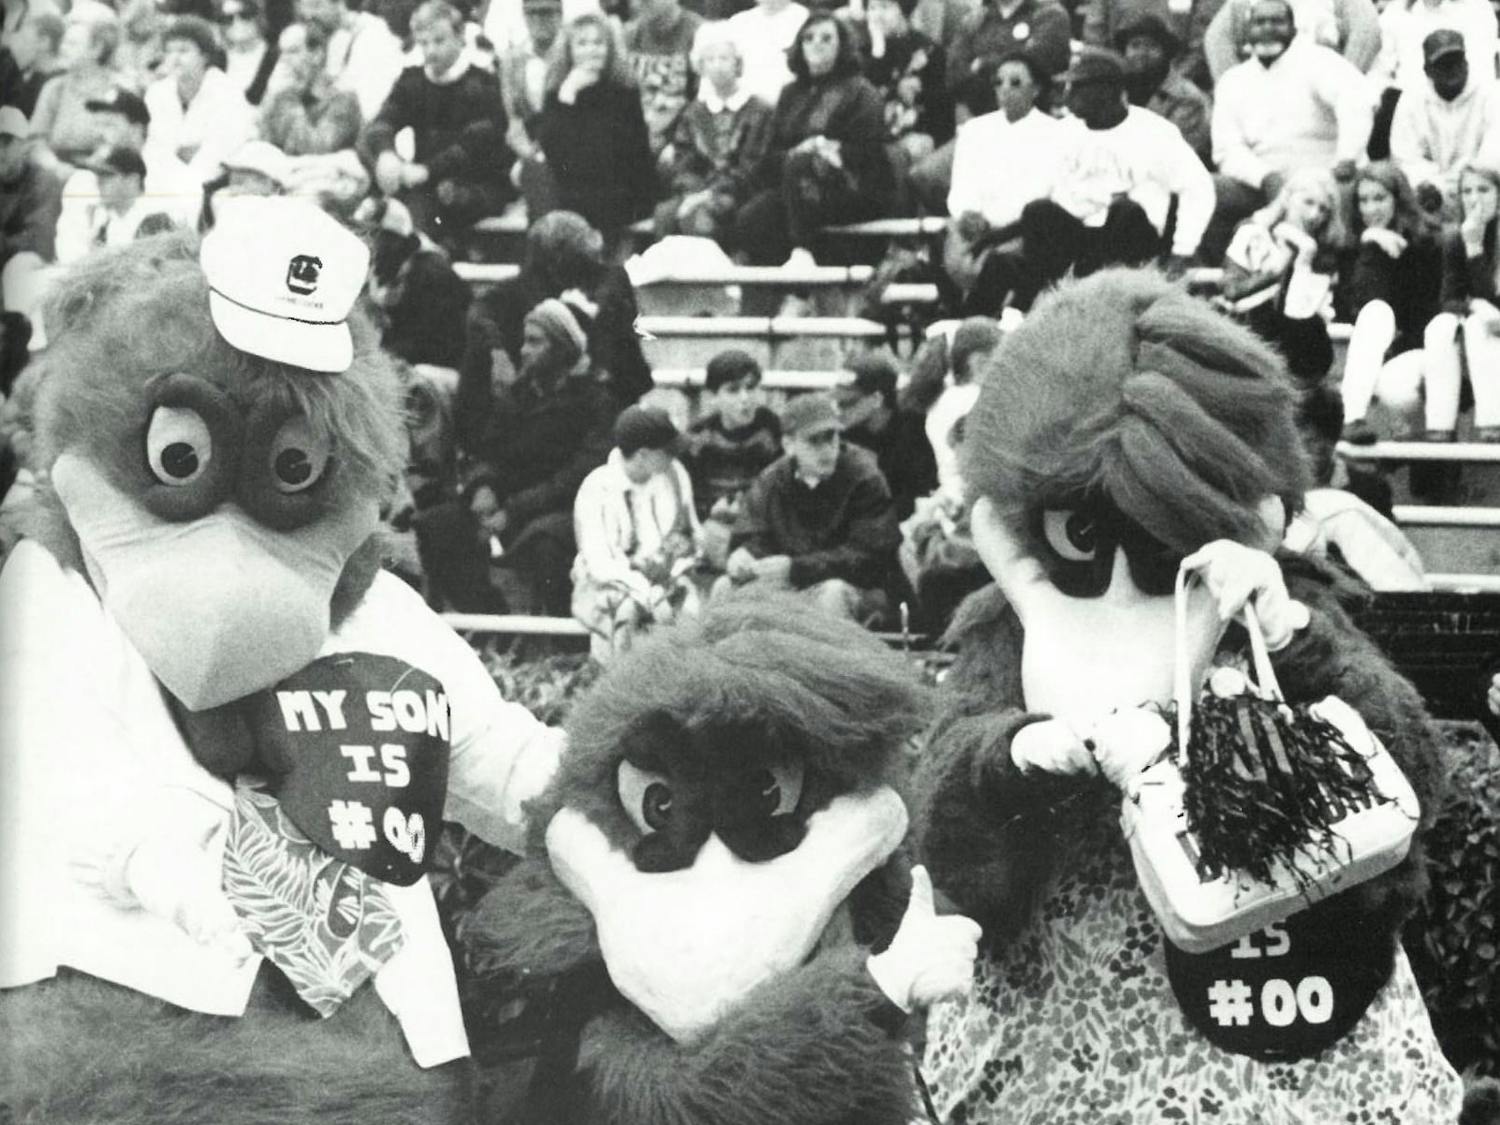 Cocky and his parents pose on the football field in 1994, displaying the Family Weekend tradition that is still seen today. The only difference is Cocky’s number, as today his jersey — and the supportive buttons his parents wear —&nbsp;read “MY SON IS #01."